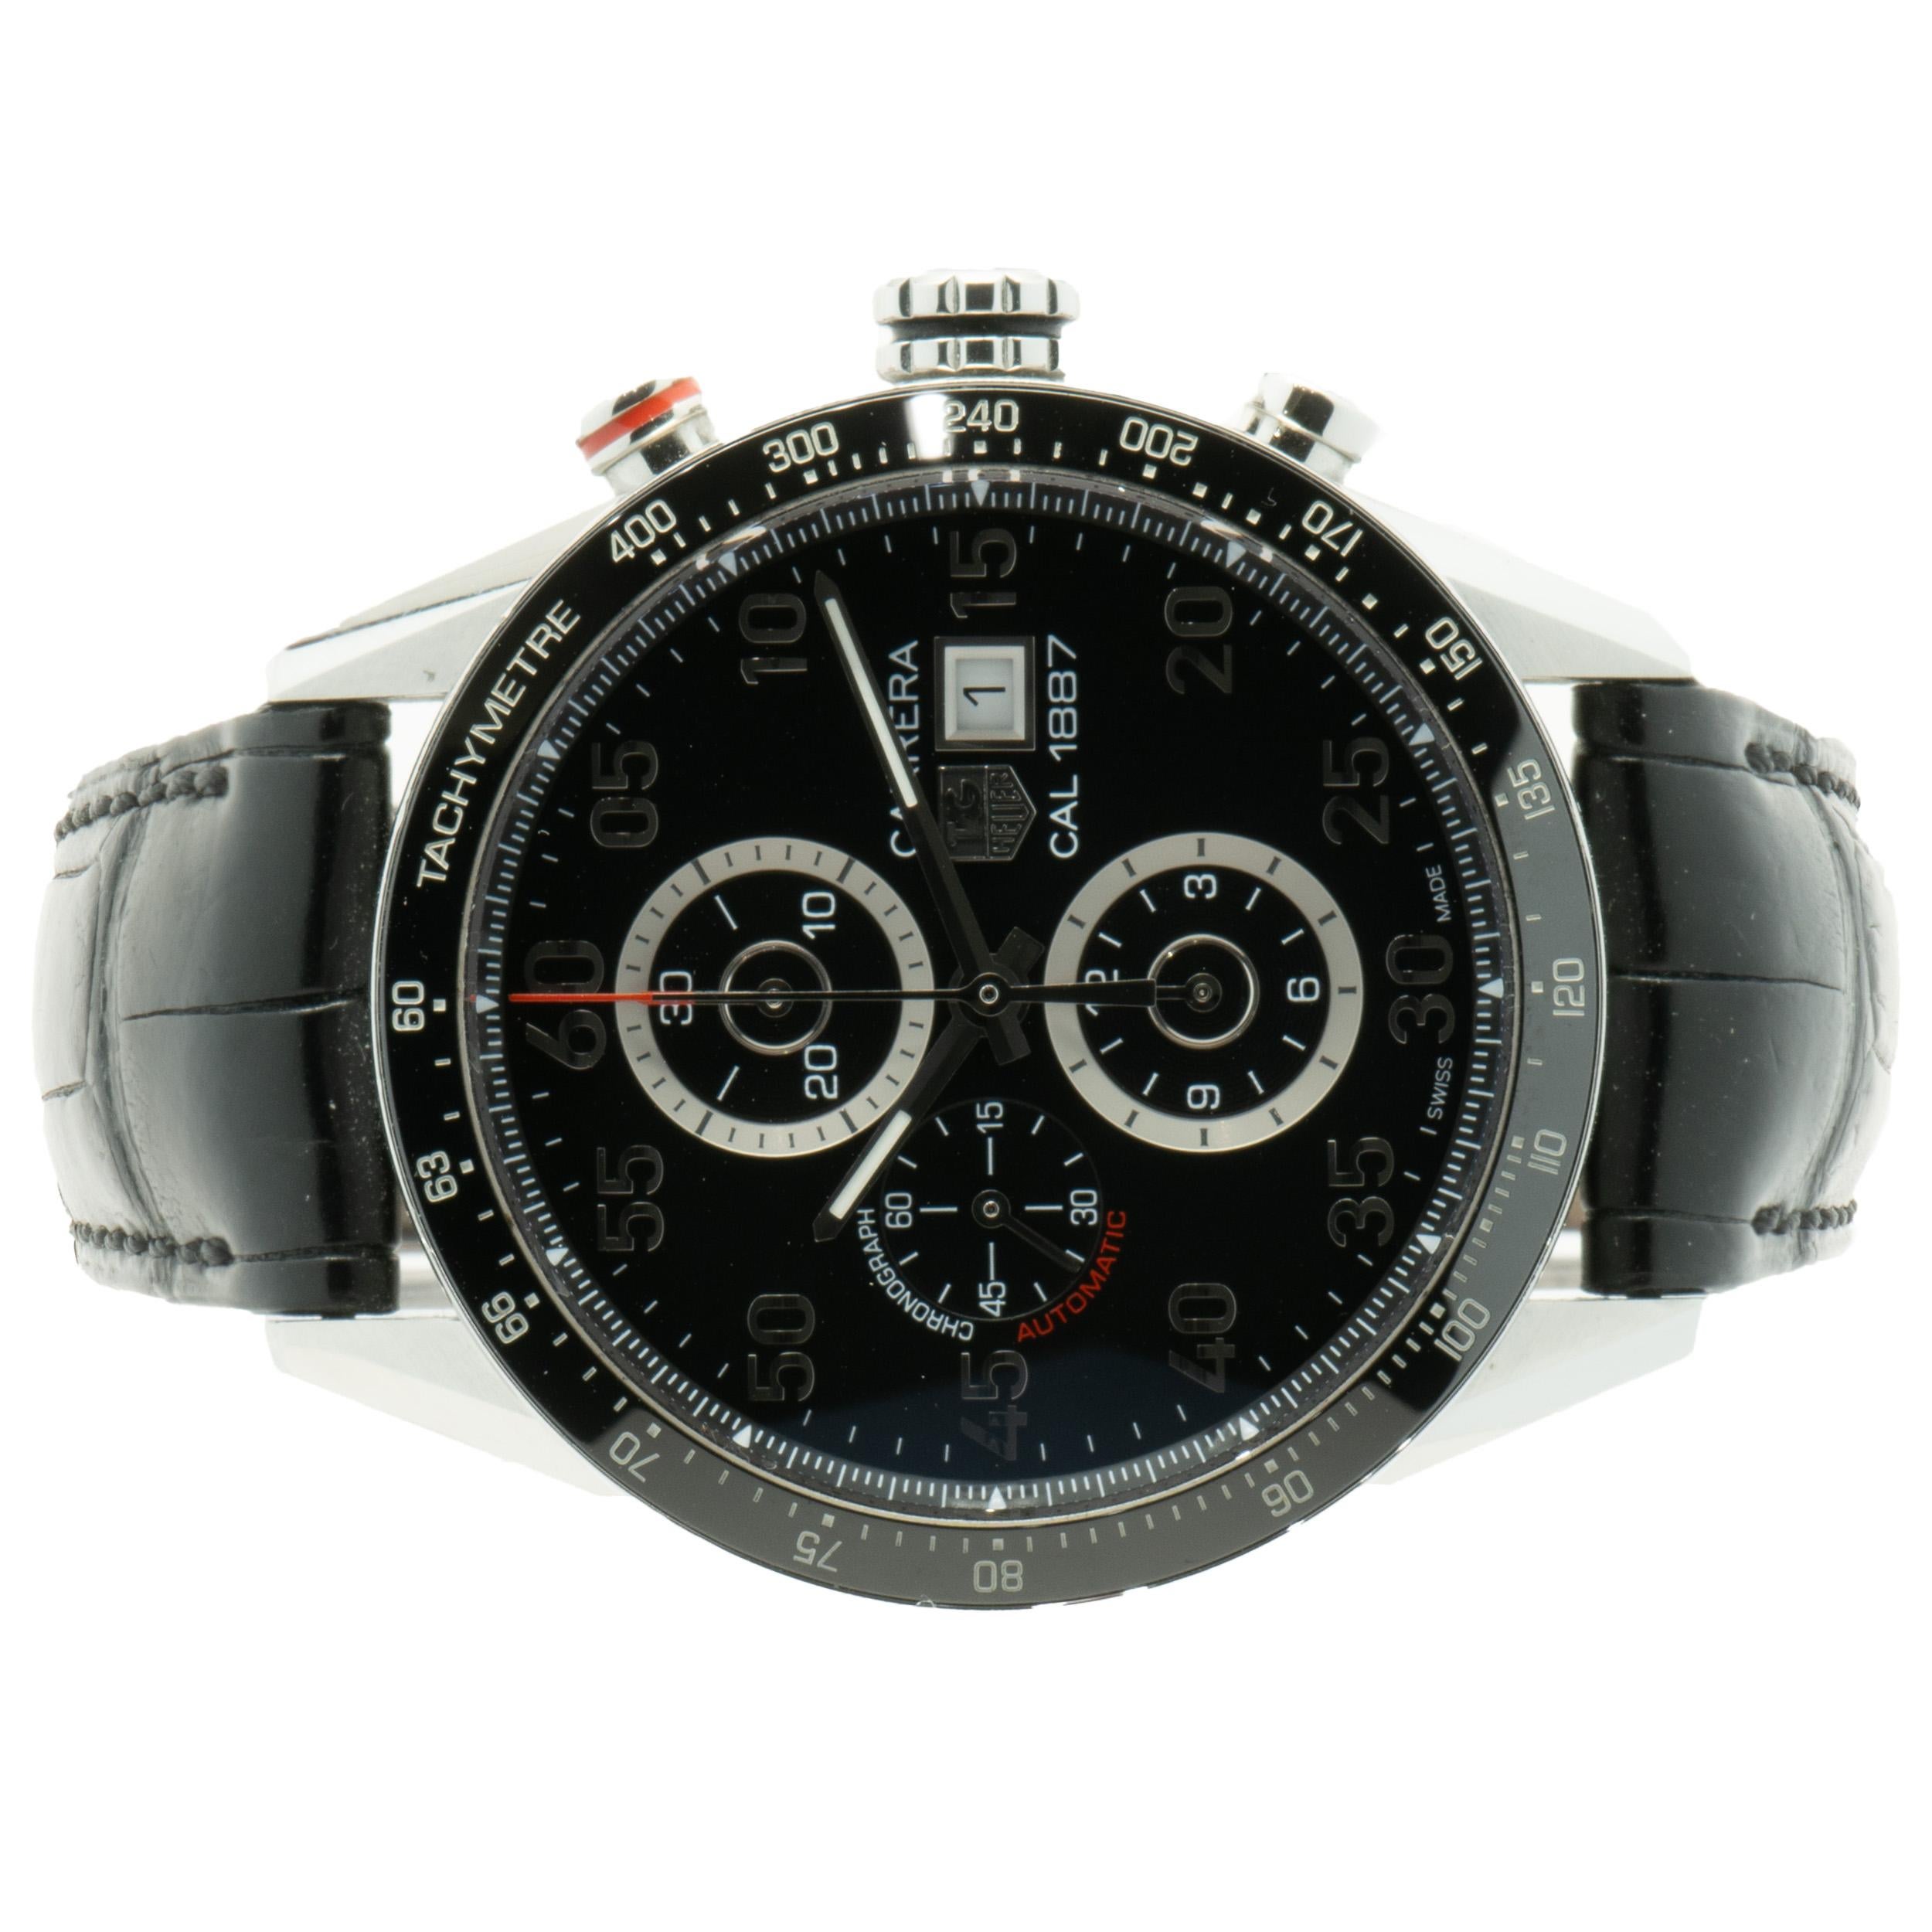 Movement: automatic
Function: hours, minutes, seconds, date, chronograph, tachymeter
Case: 43mm round stainless steel case
Dial: black arabic, 60-second, 30-minute, & 12-hour sub dials
Band: Tag Heuer black leather strap, deployment